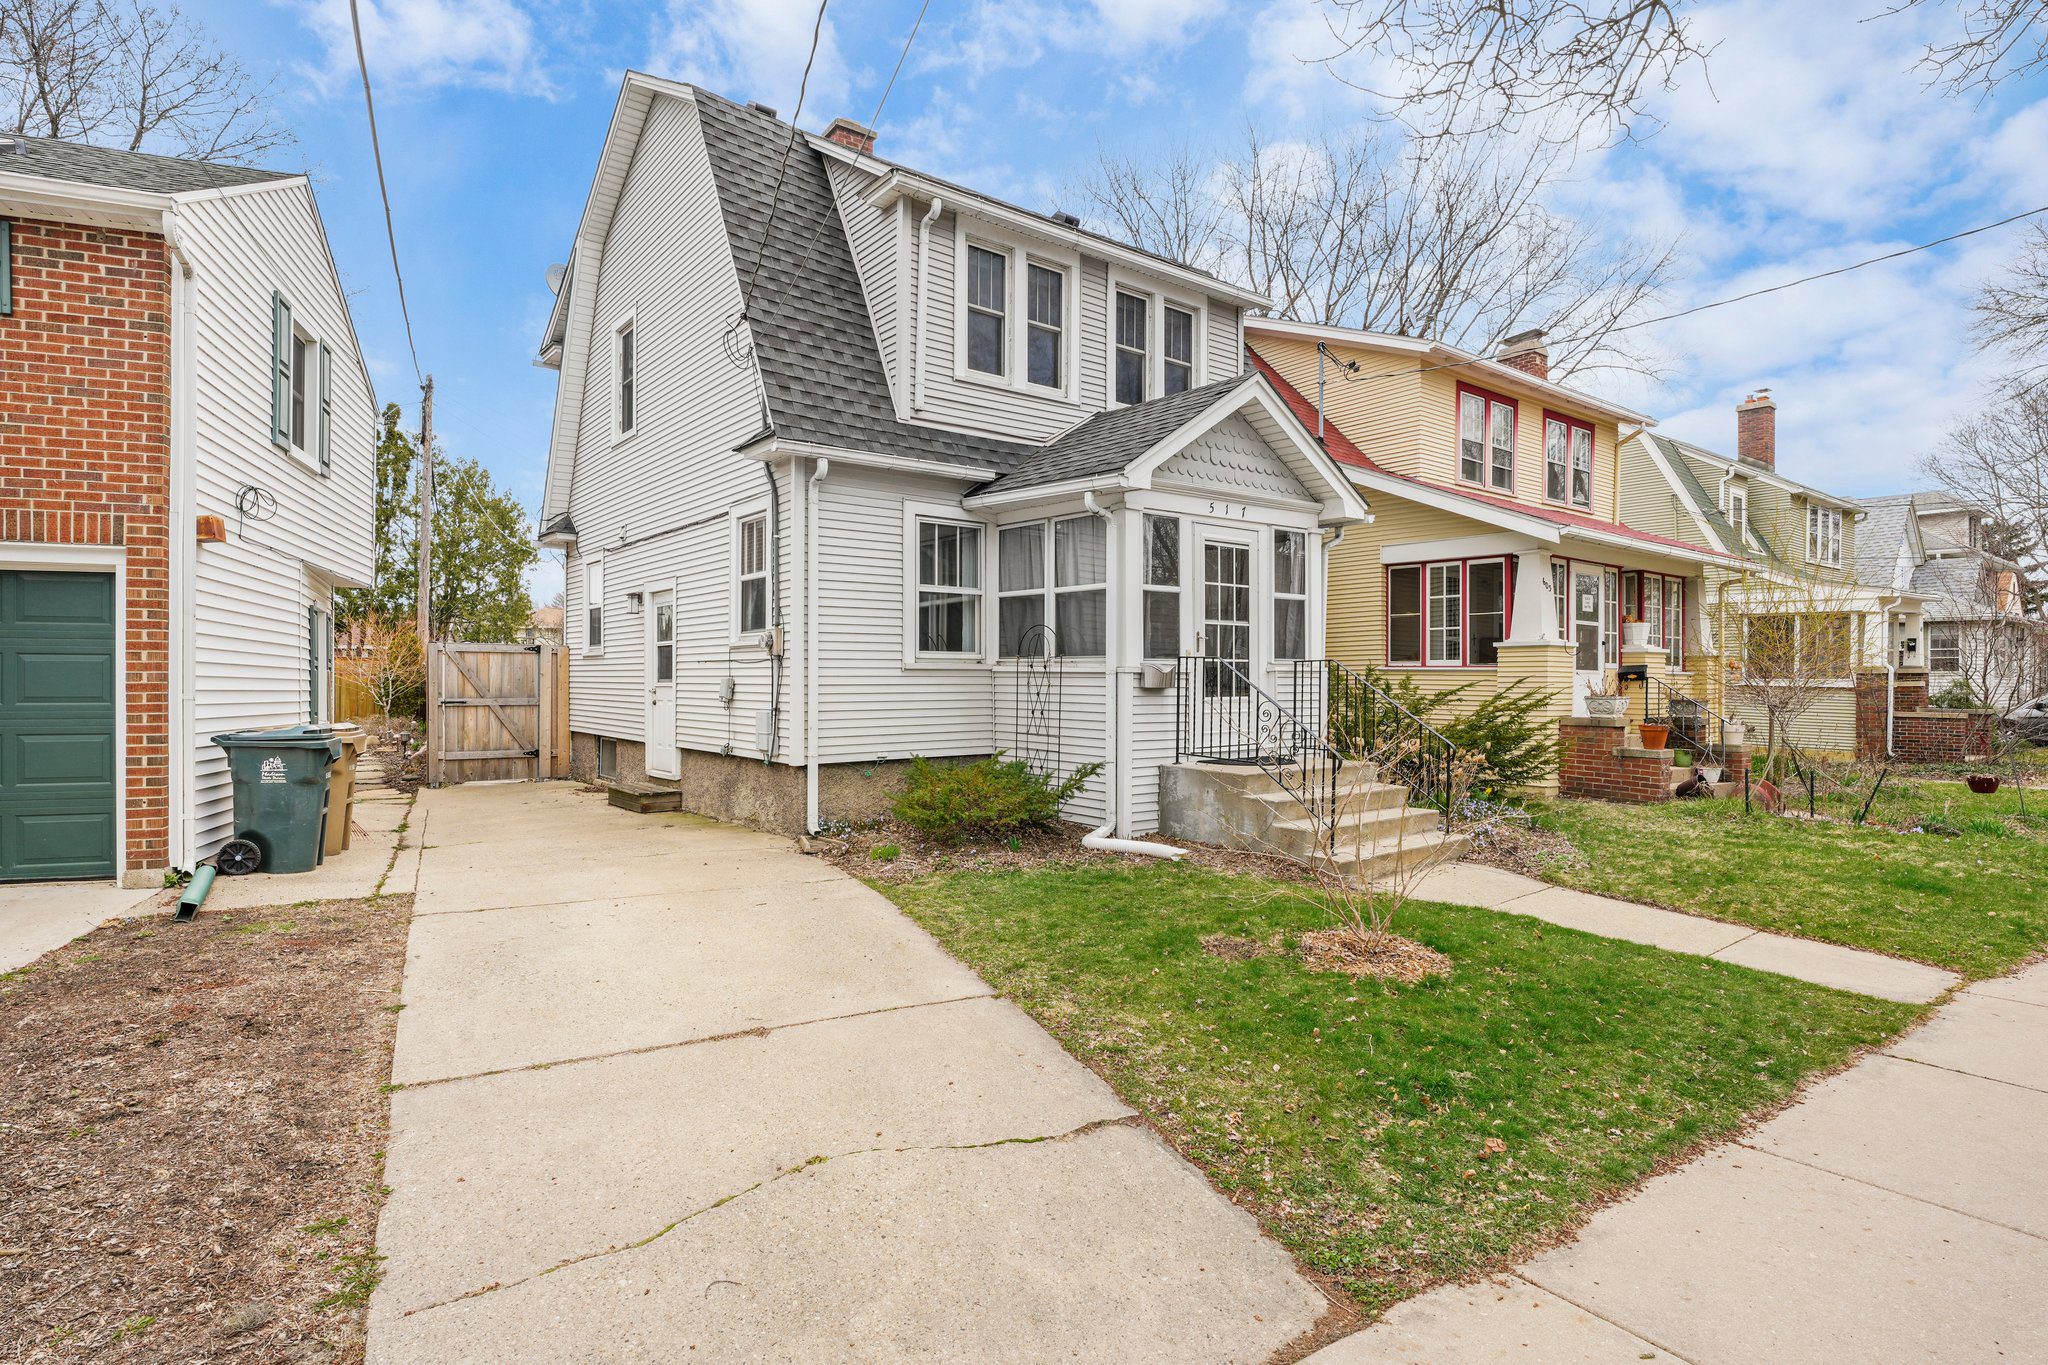 3-web-or-mls-517-russell-st